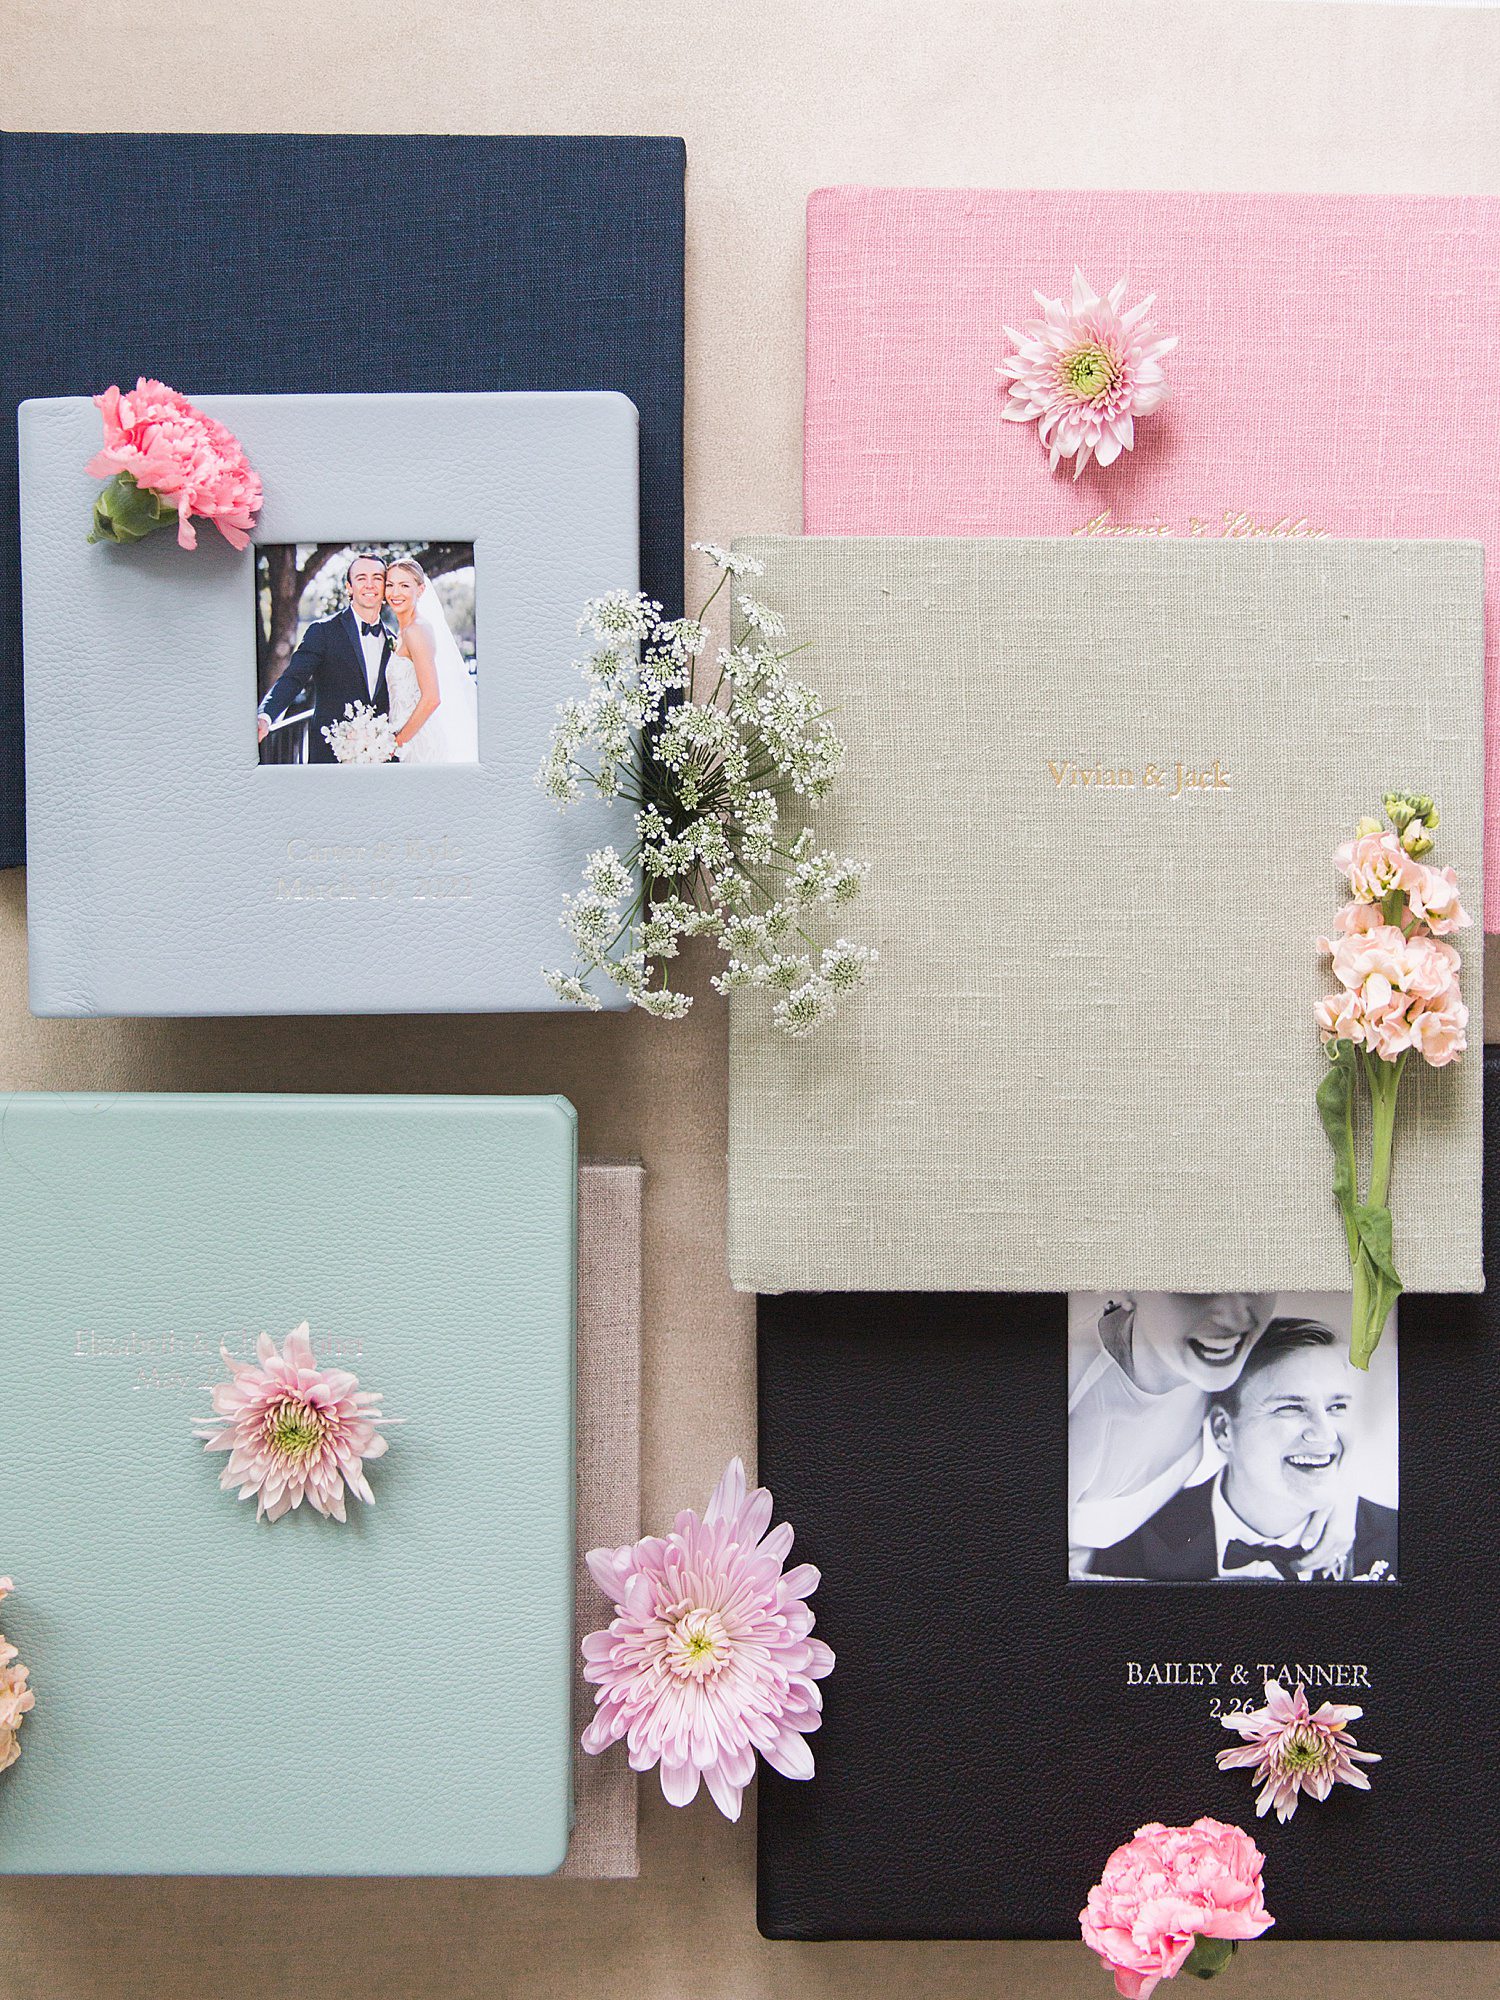 Variety of wedding albums with different colored covers